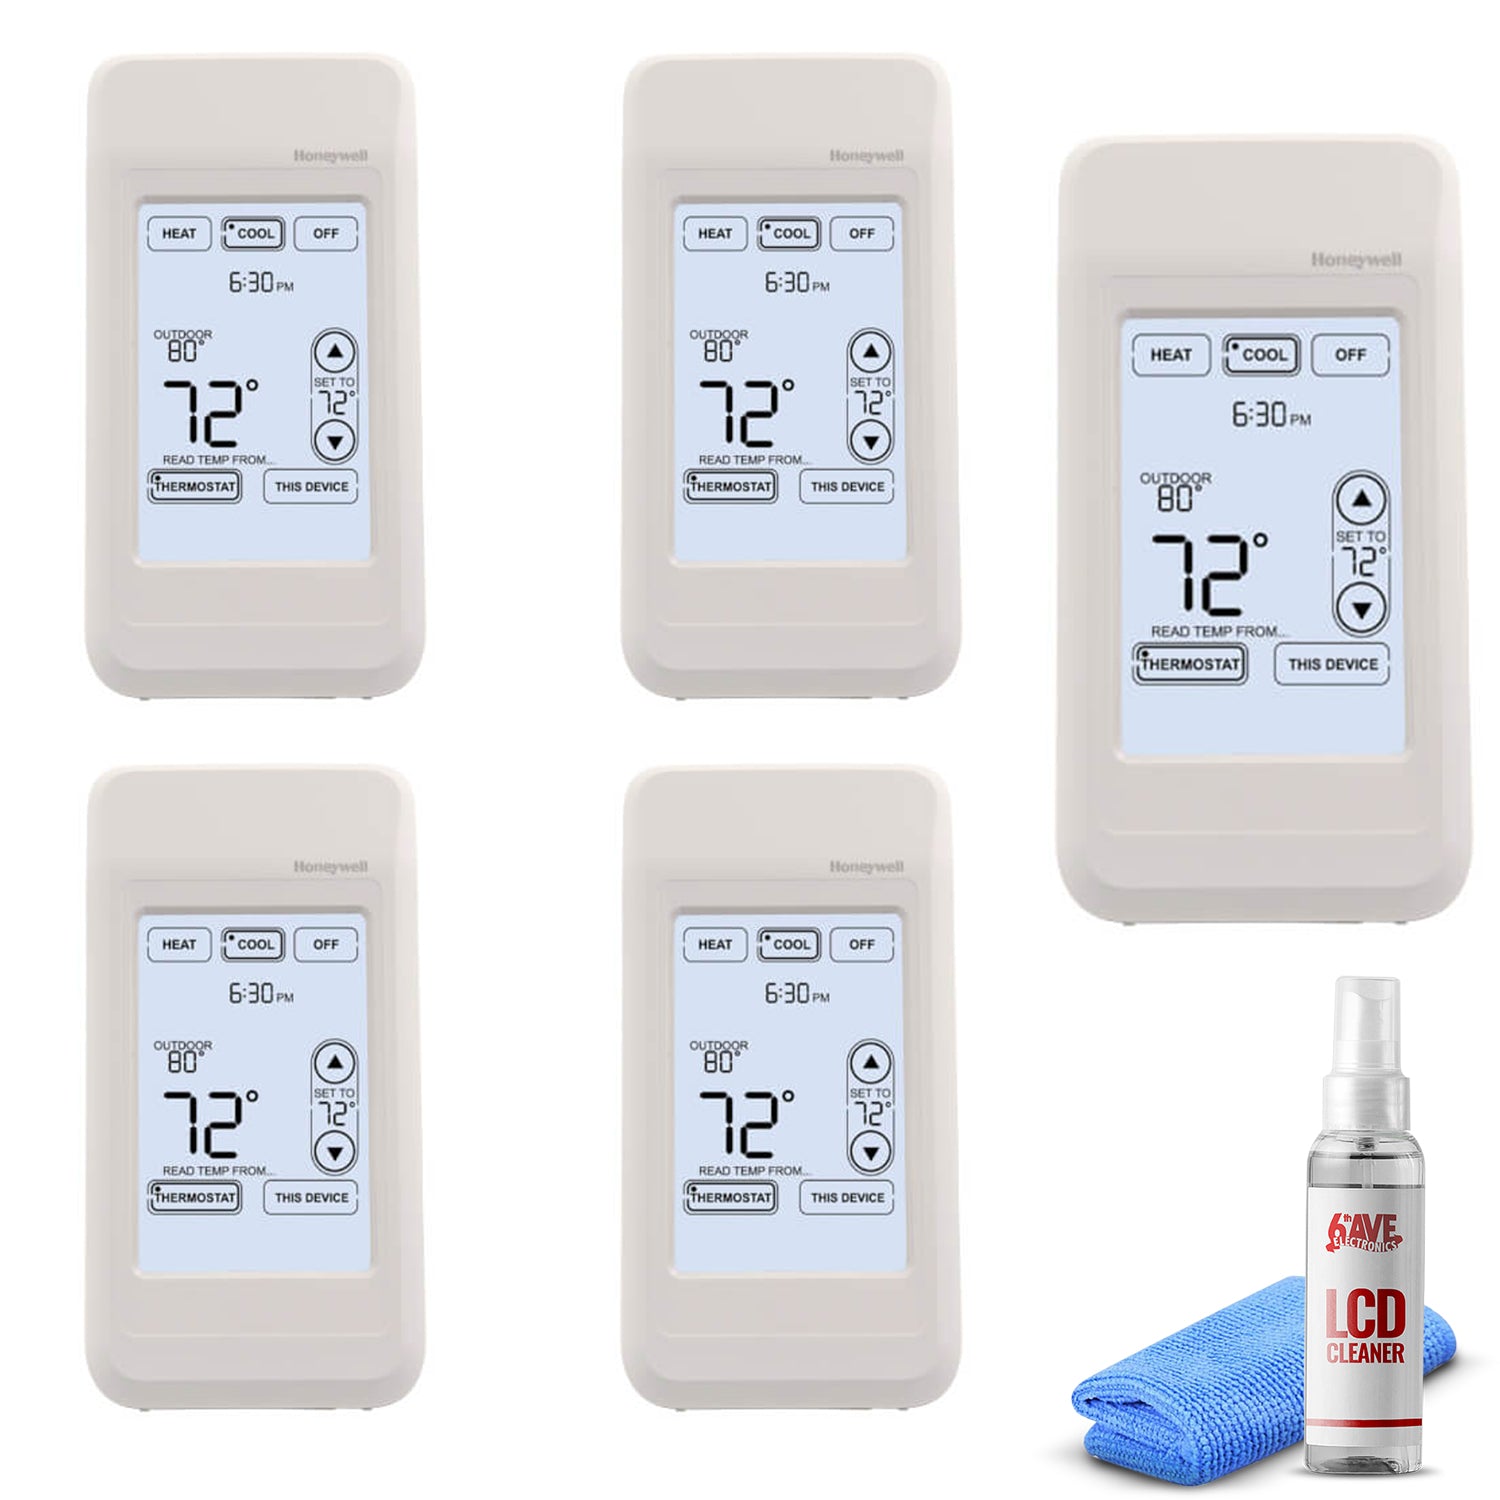 5-Pack Honeywell REM5000R1001 Portable Comfort Control + LCD Cleaner